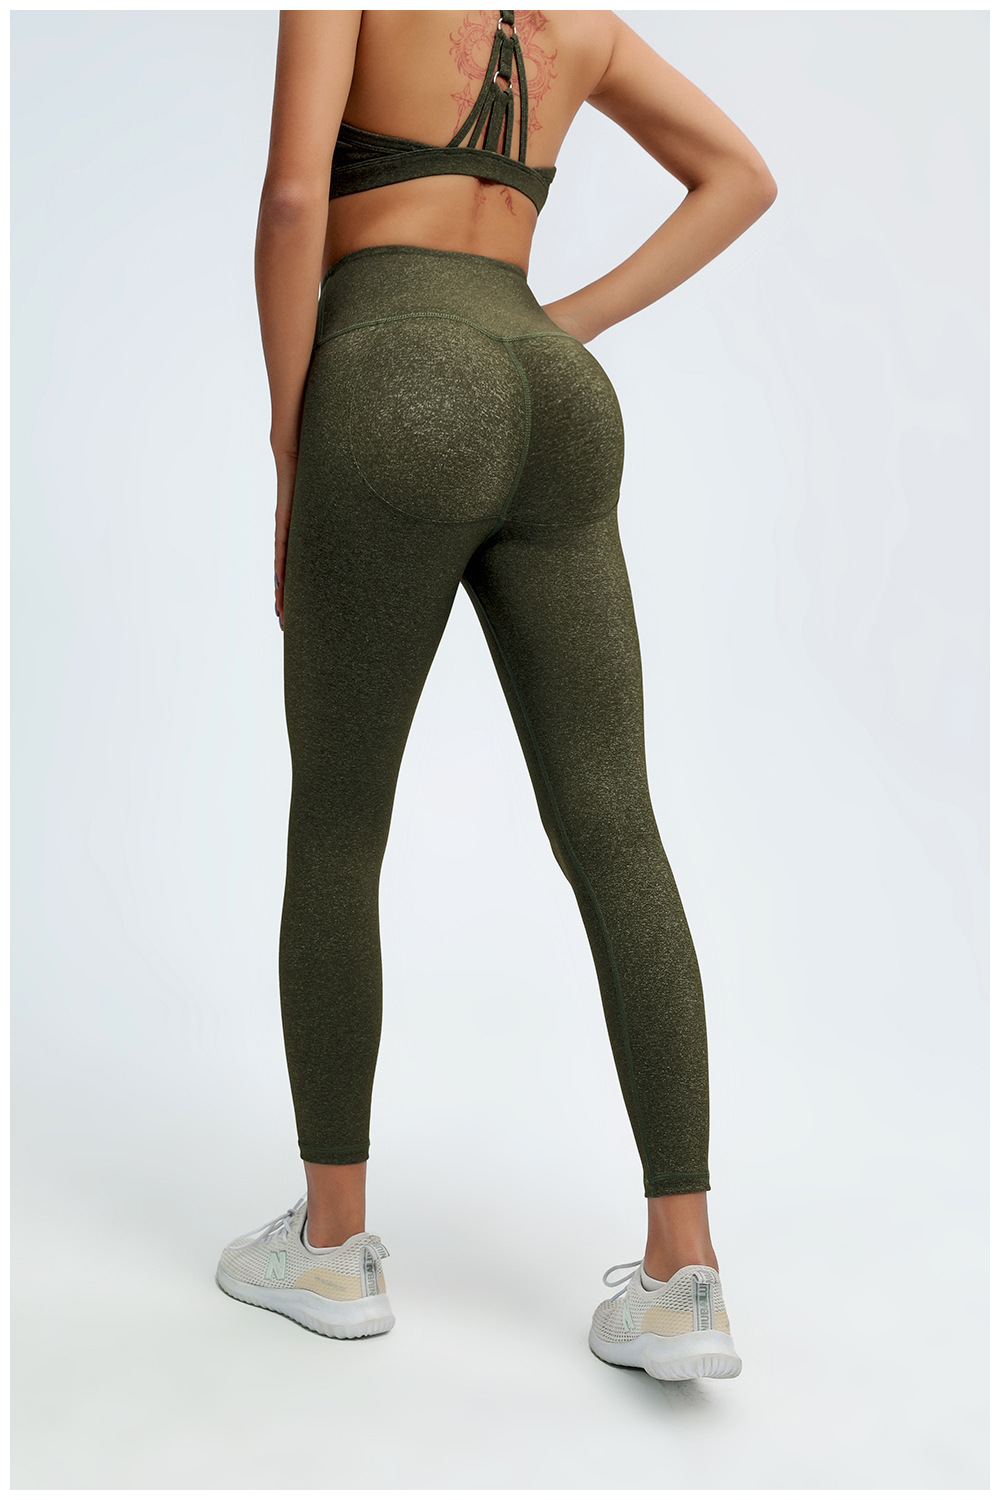 High Waist Womens Olive Green Yoga Leggings With Pockets Sexy And Stretchy  Fitness Pants For Summer Sports XL Size From Bidalina, $5.89